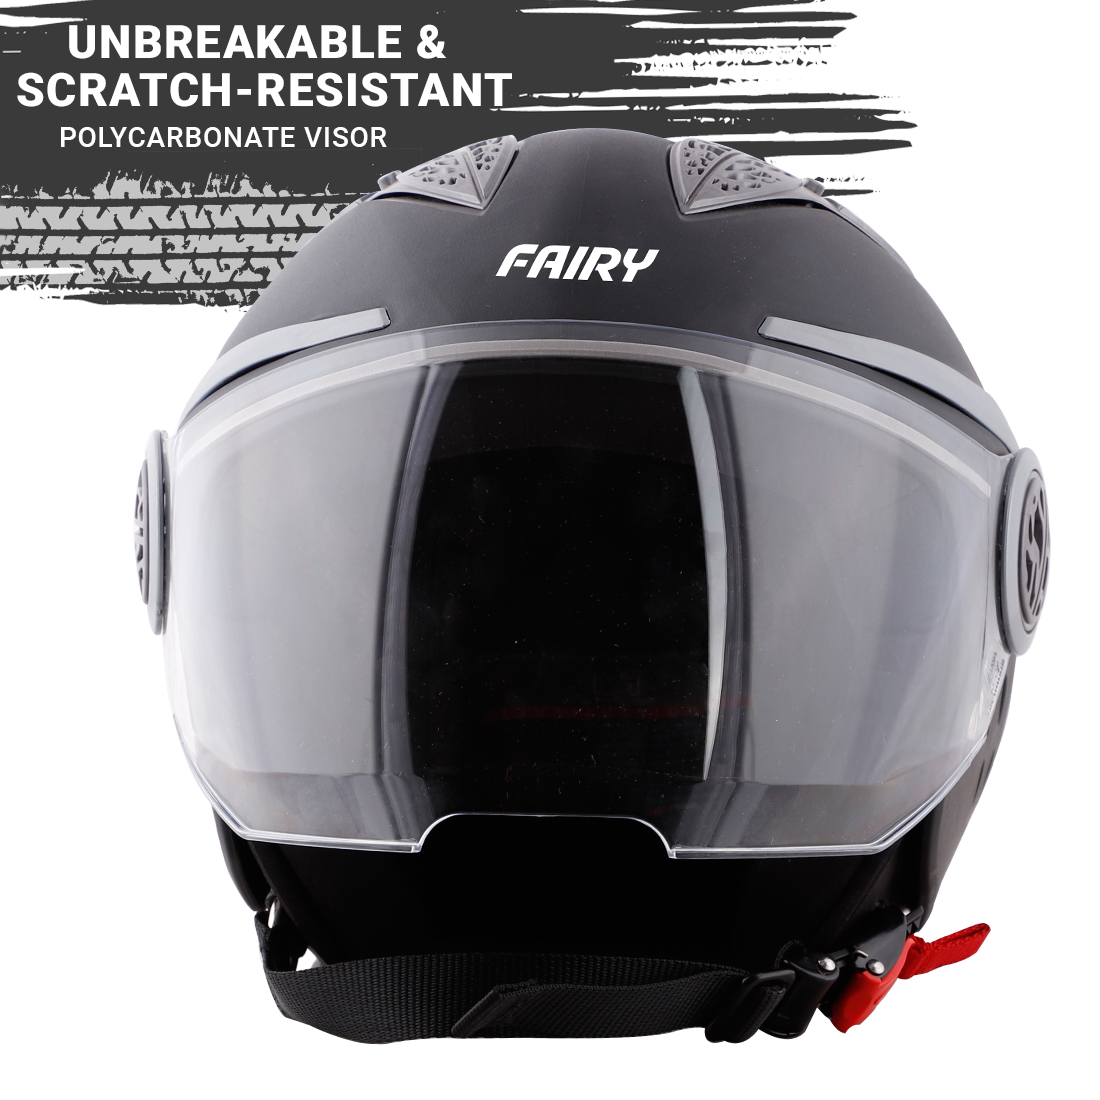 Steelbird Fairy Classic Specially Designed ISI Certified Helmet For Girls || Womens  (Black With Clear Visor)